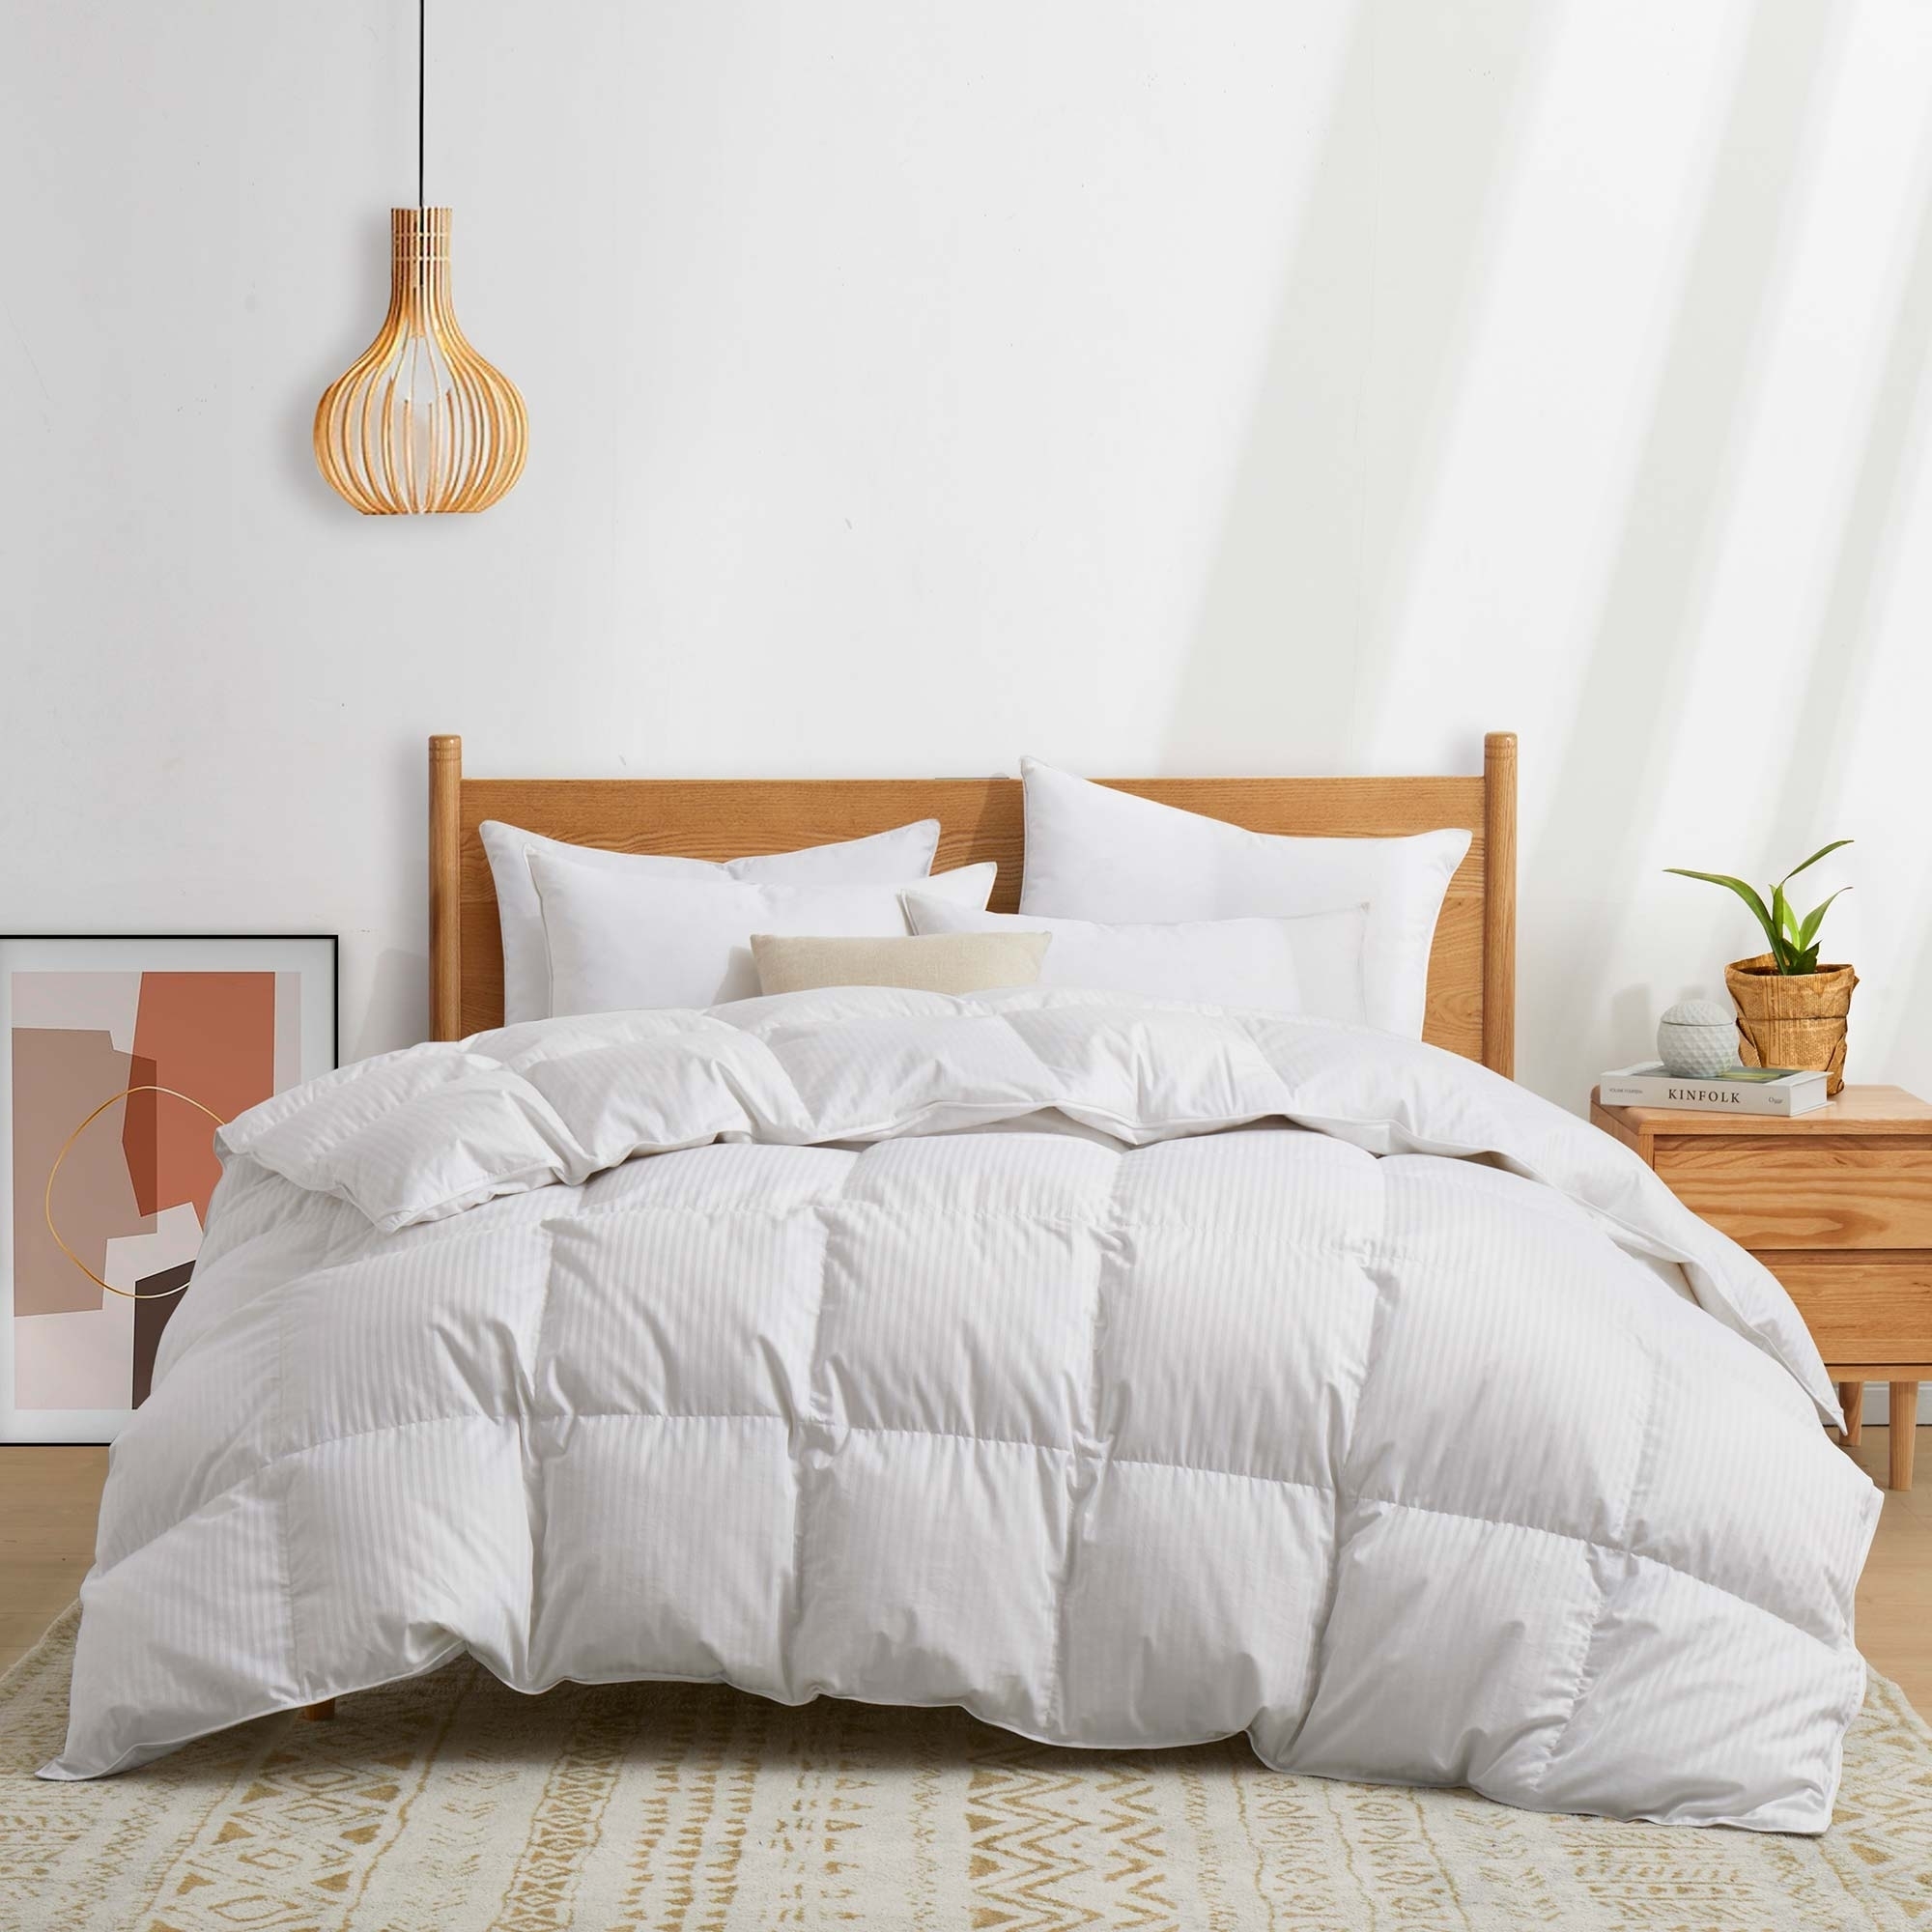 Made In Germany 800 Fill Power Luxurious European White Down Comforter-Heavy Weight Comforter& Medium Weight Comforter - Medium Weight, King